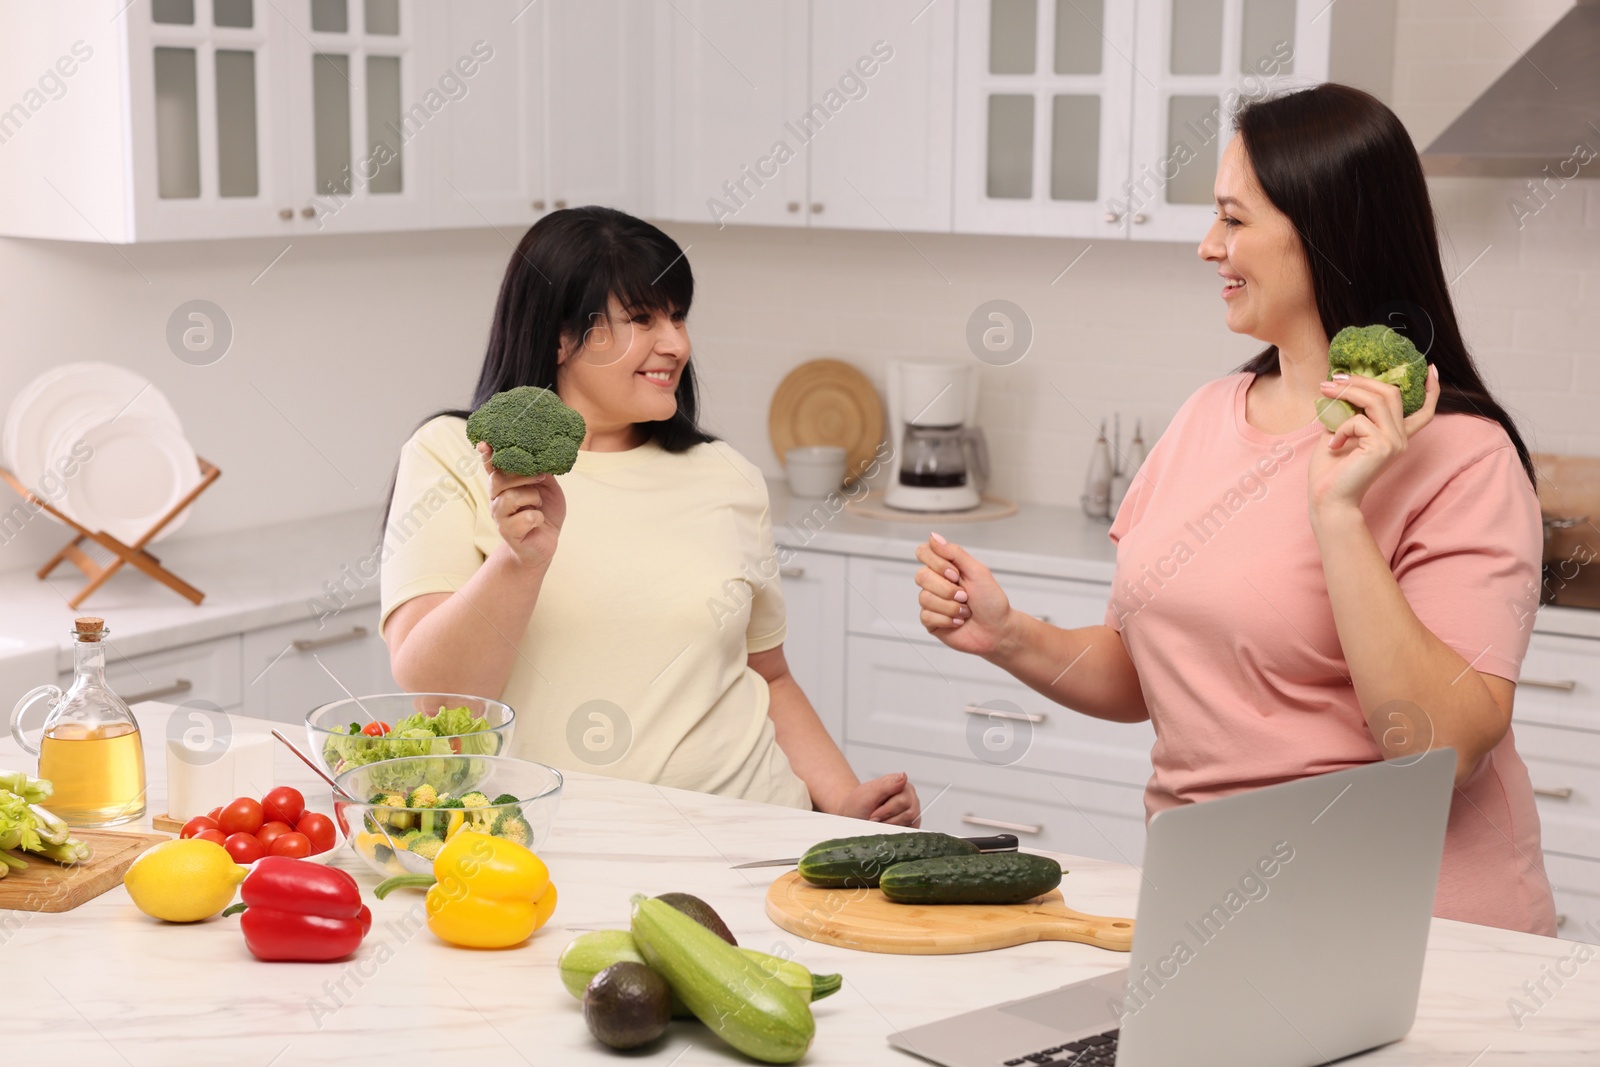 Photo of Happy overweight women having fun while cooking together in kitchen